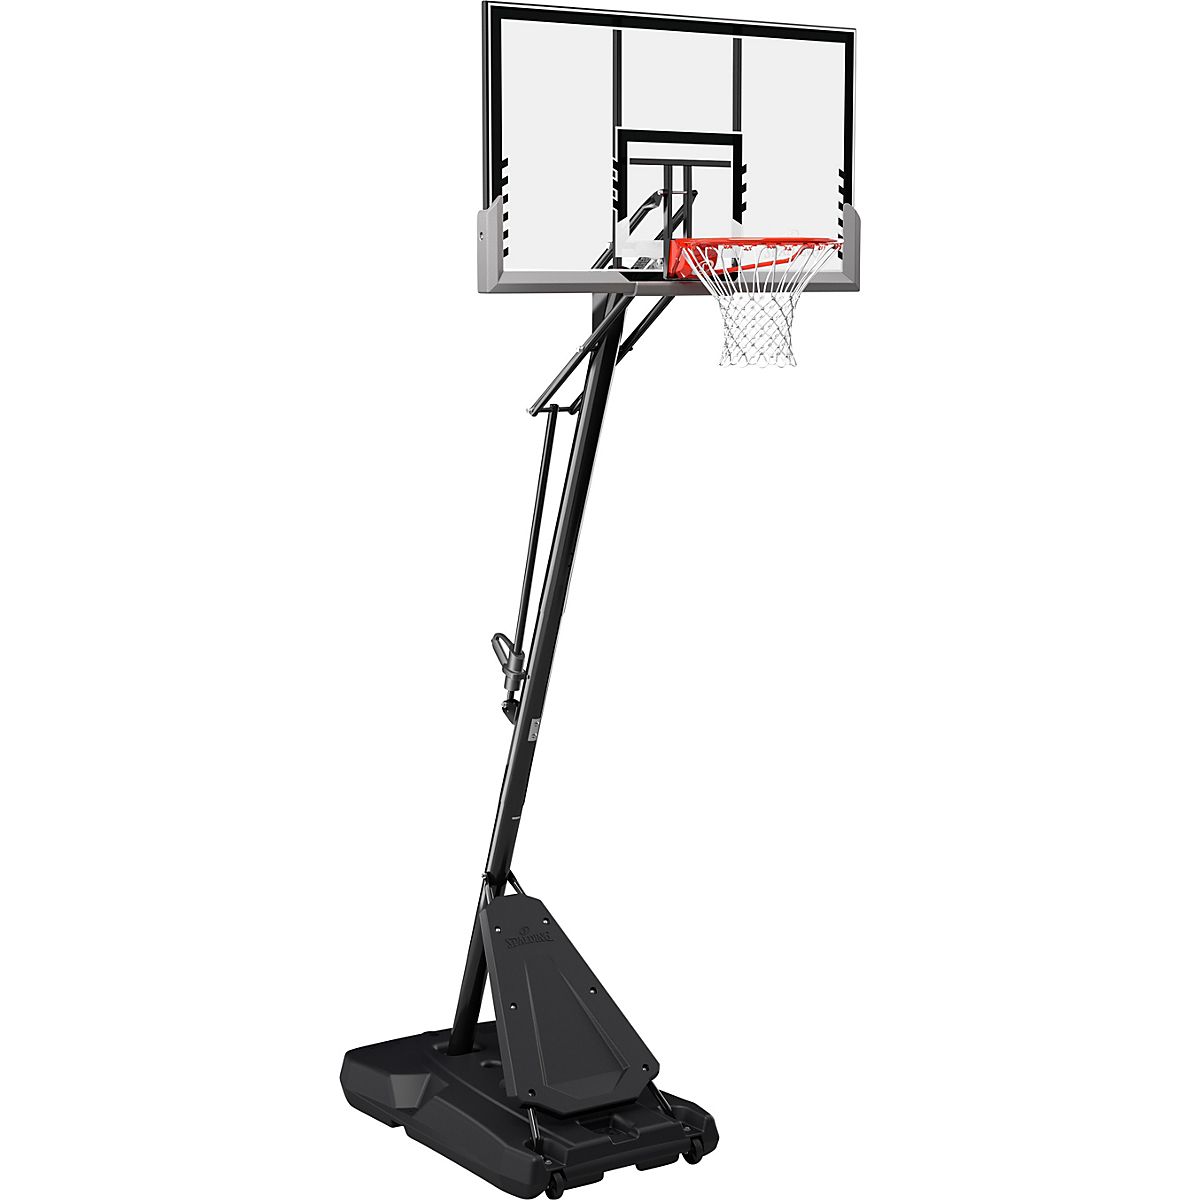 Spalding 54 in Angled Portable Basketball Hoop | Academy